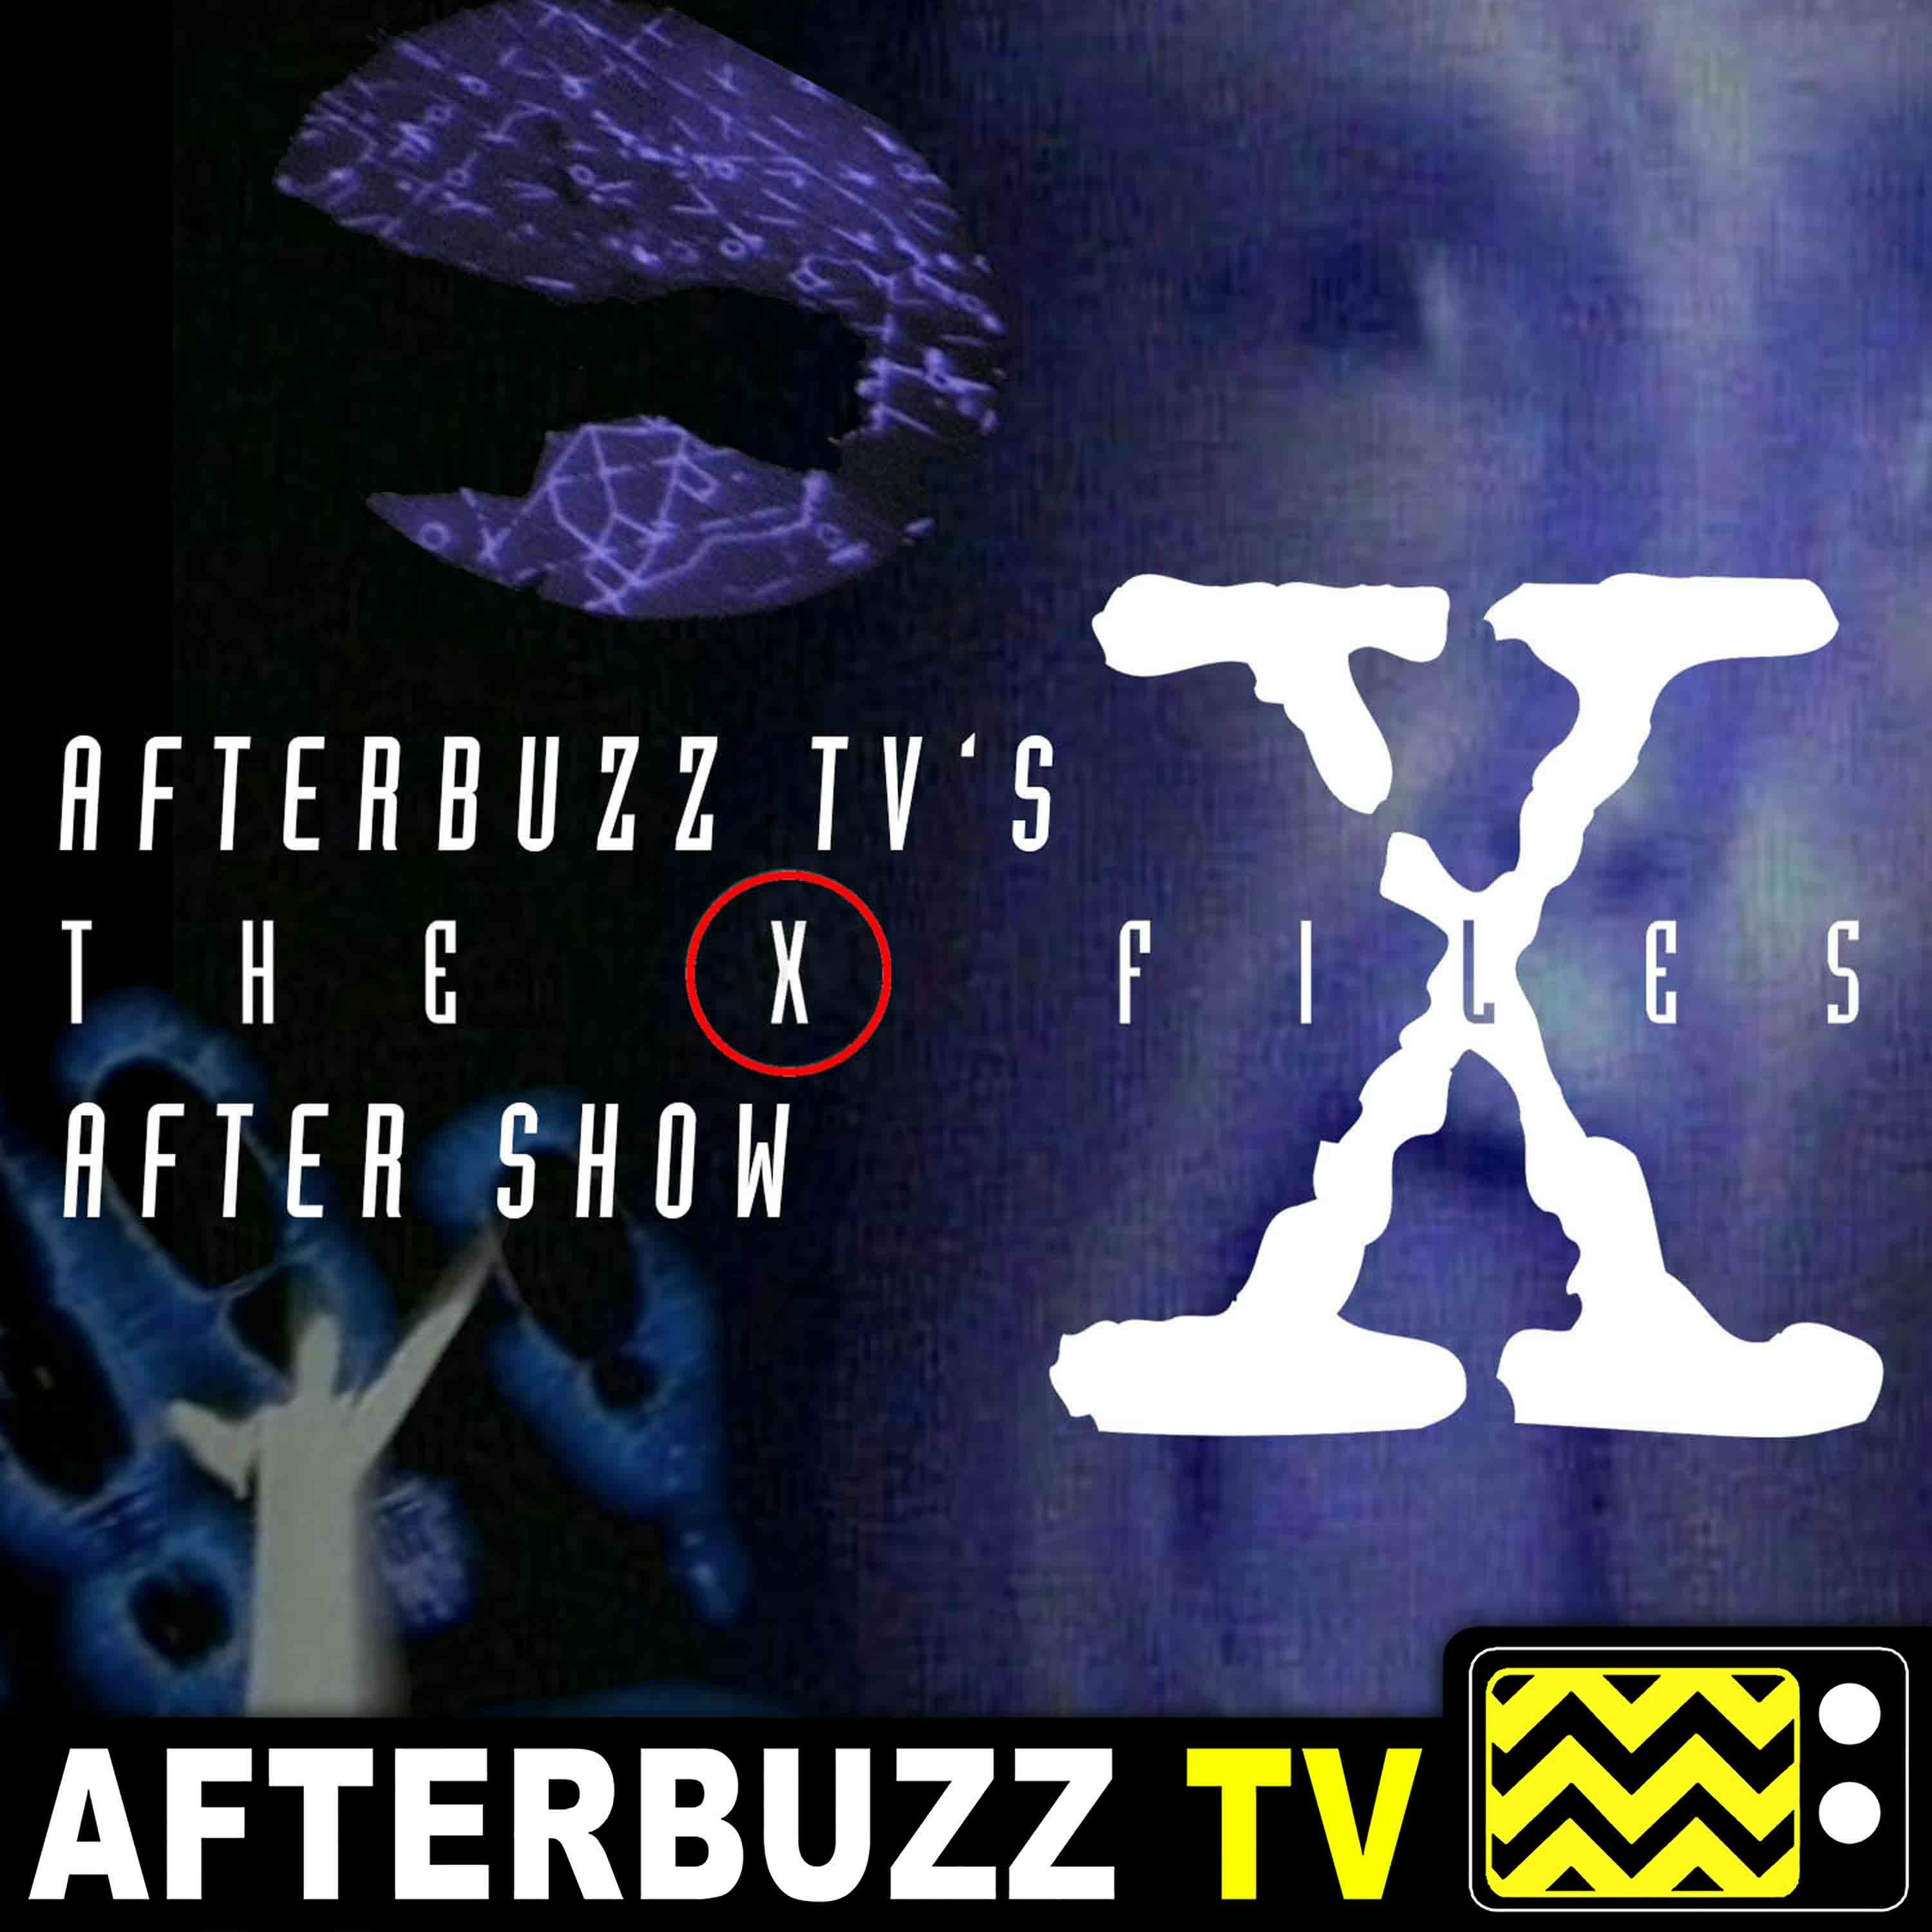 X Files S:11 | This E:2 | AfterBuzz TV AfterShow